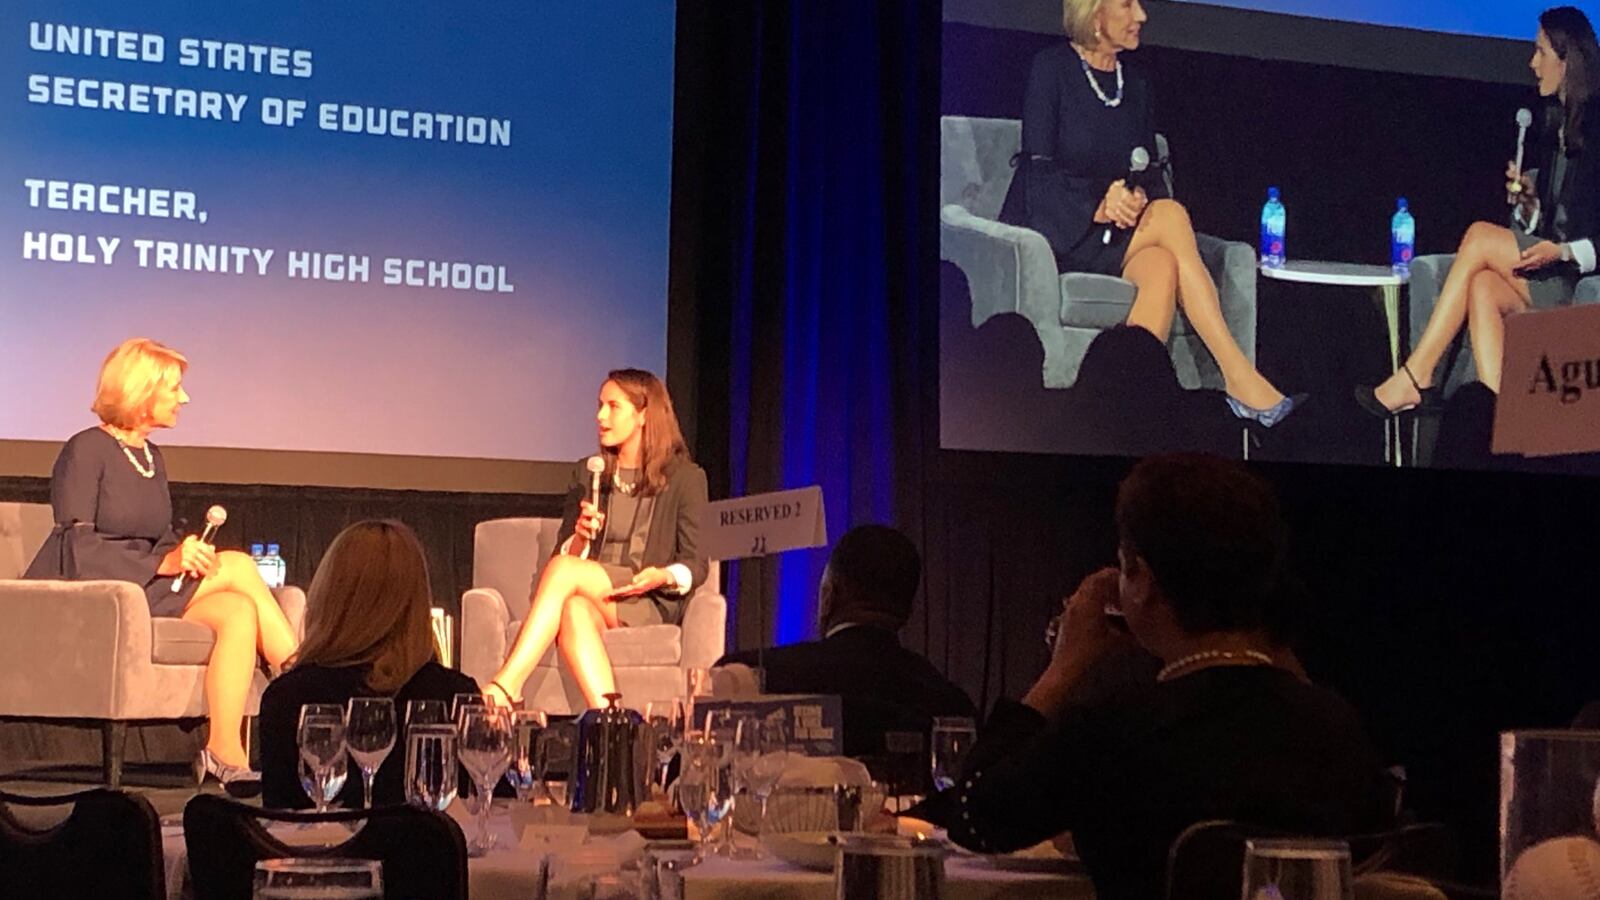 U.S. Secretary of Education Betsy DeVos, left, speaks with Kate Hardiman, a teacher at Holy Trinity High School in Chicago, on May 2, 2019, at the American Federation for Children's national policy summit in downtown Chicago.